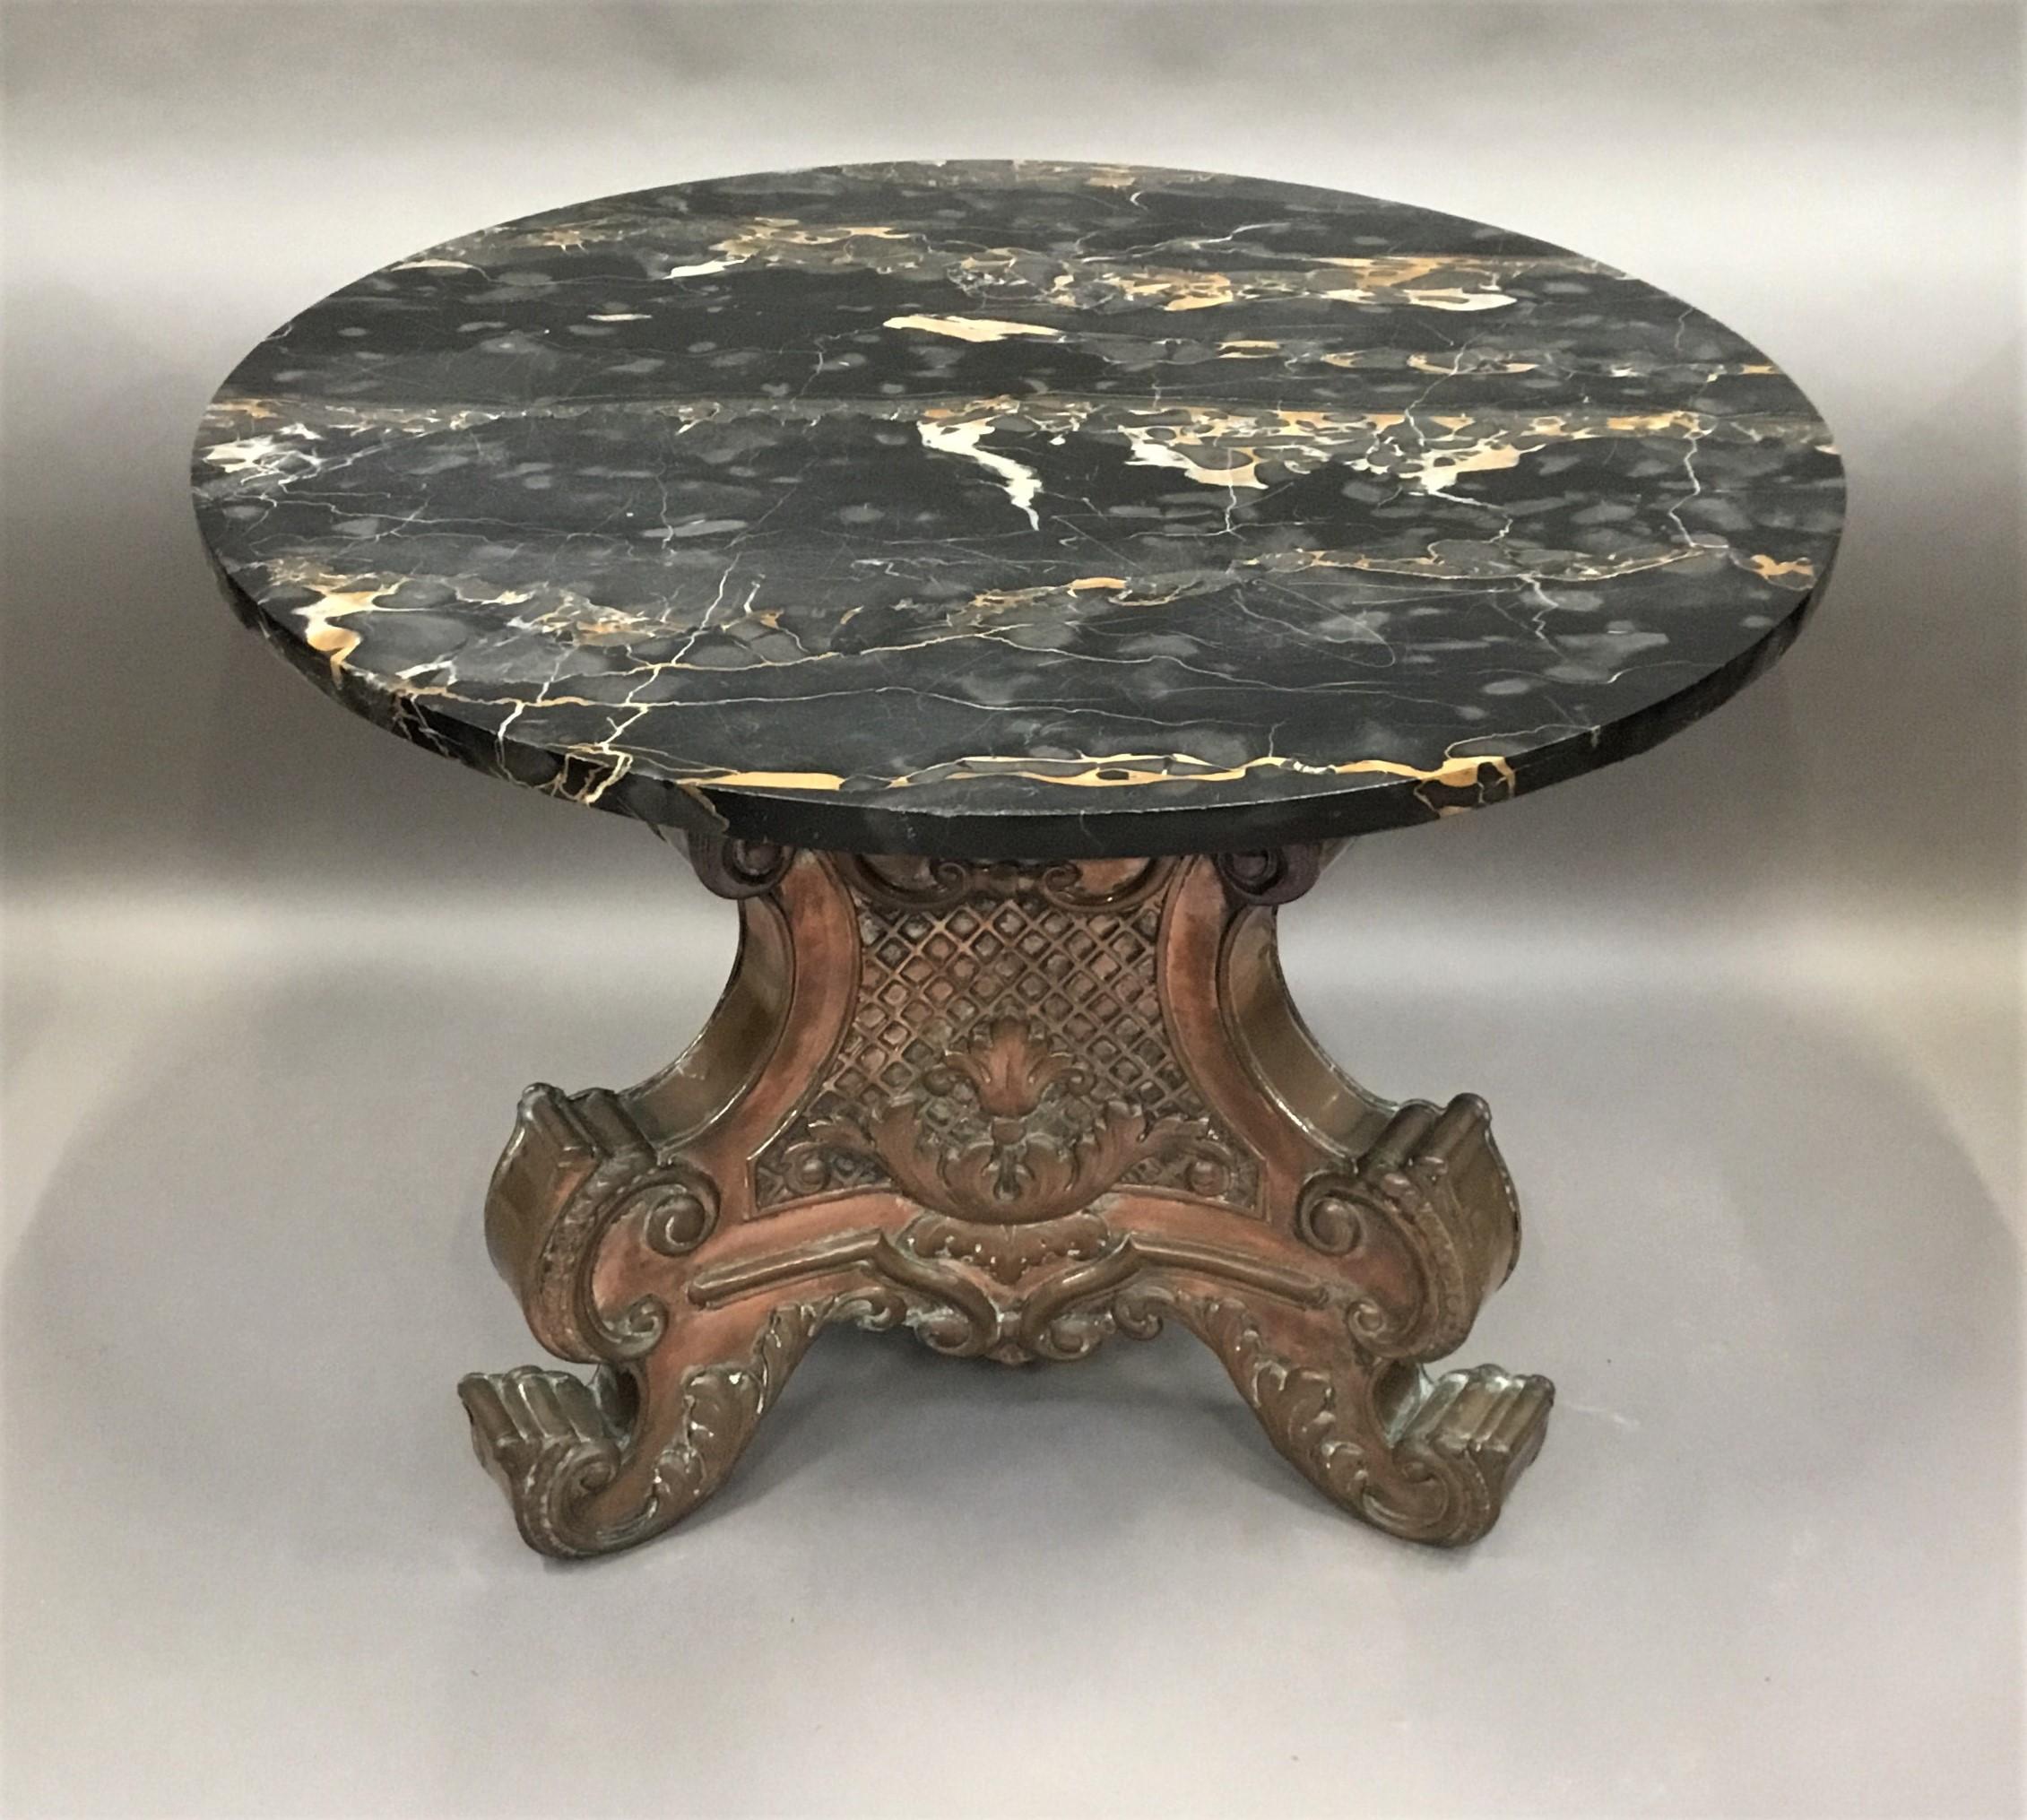 Italian Copper and Marble Low Centre Table / Coffee Table B Battioli In Good Condition For Sale In Moreton-in-Marsh, Gloucestershire